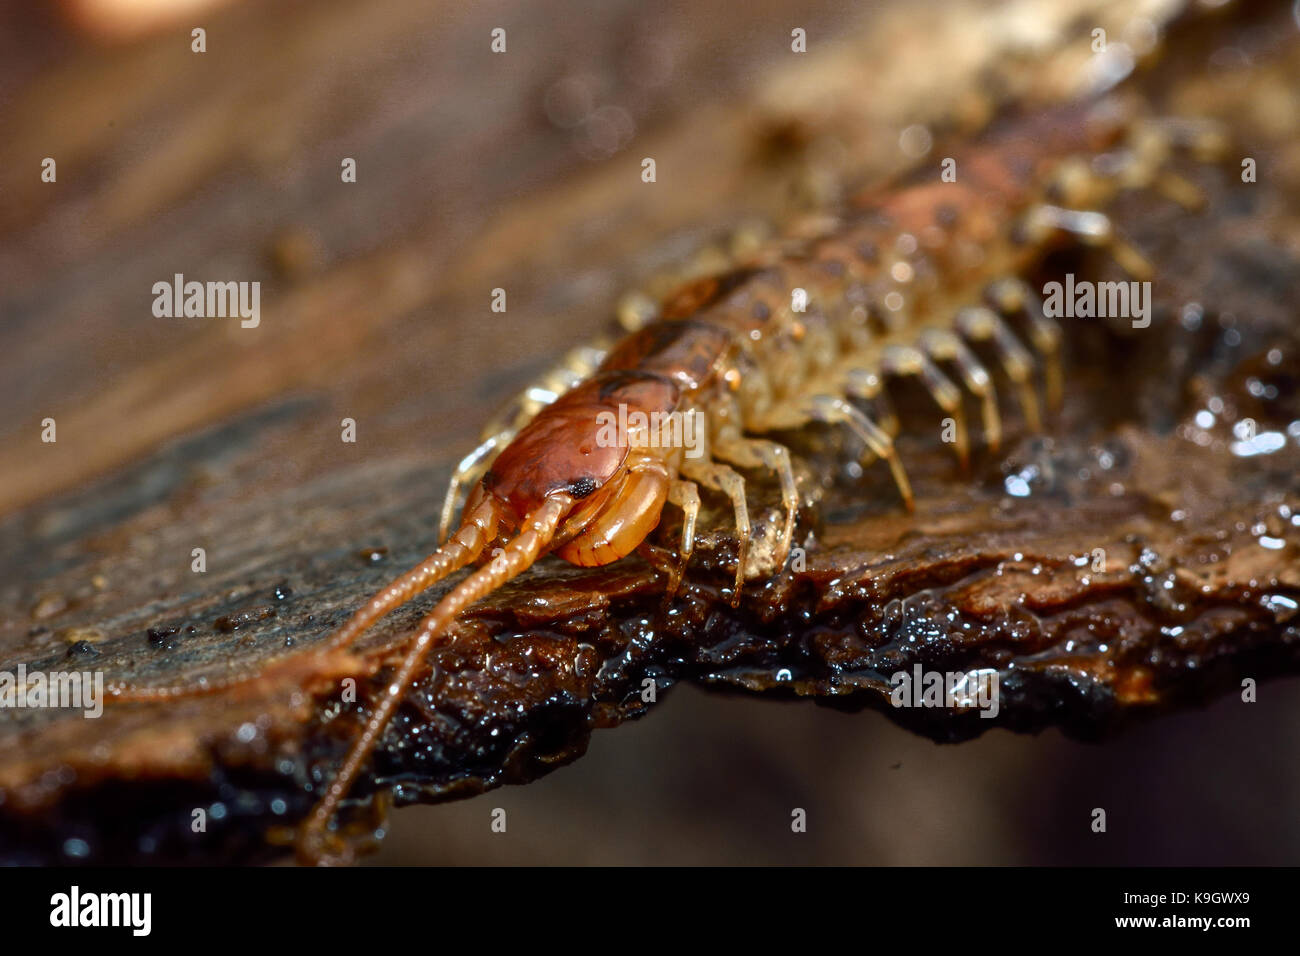 Banded centipede (Lithobius variegatus). Arthropod in the class Chilopoda, family Lithobiidae, on bark showing forcipules Stock Photo